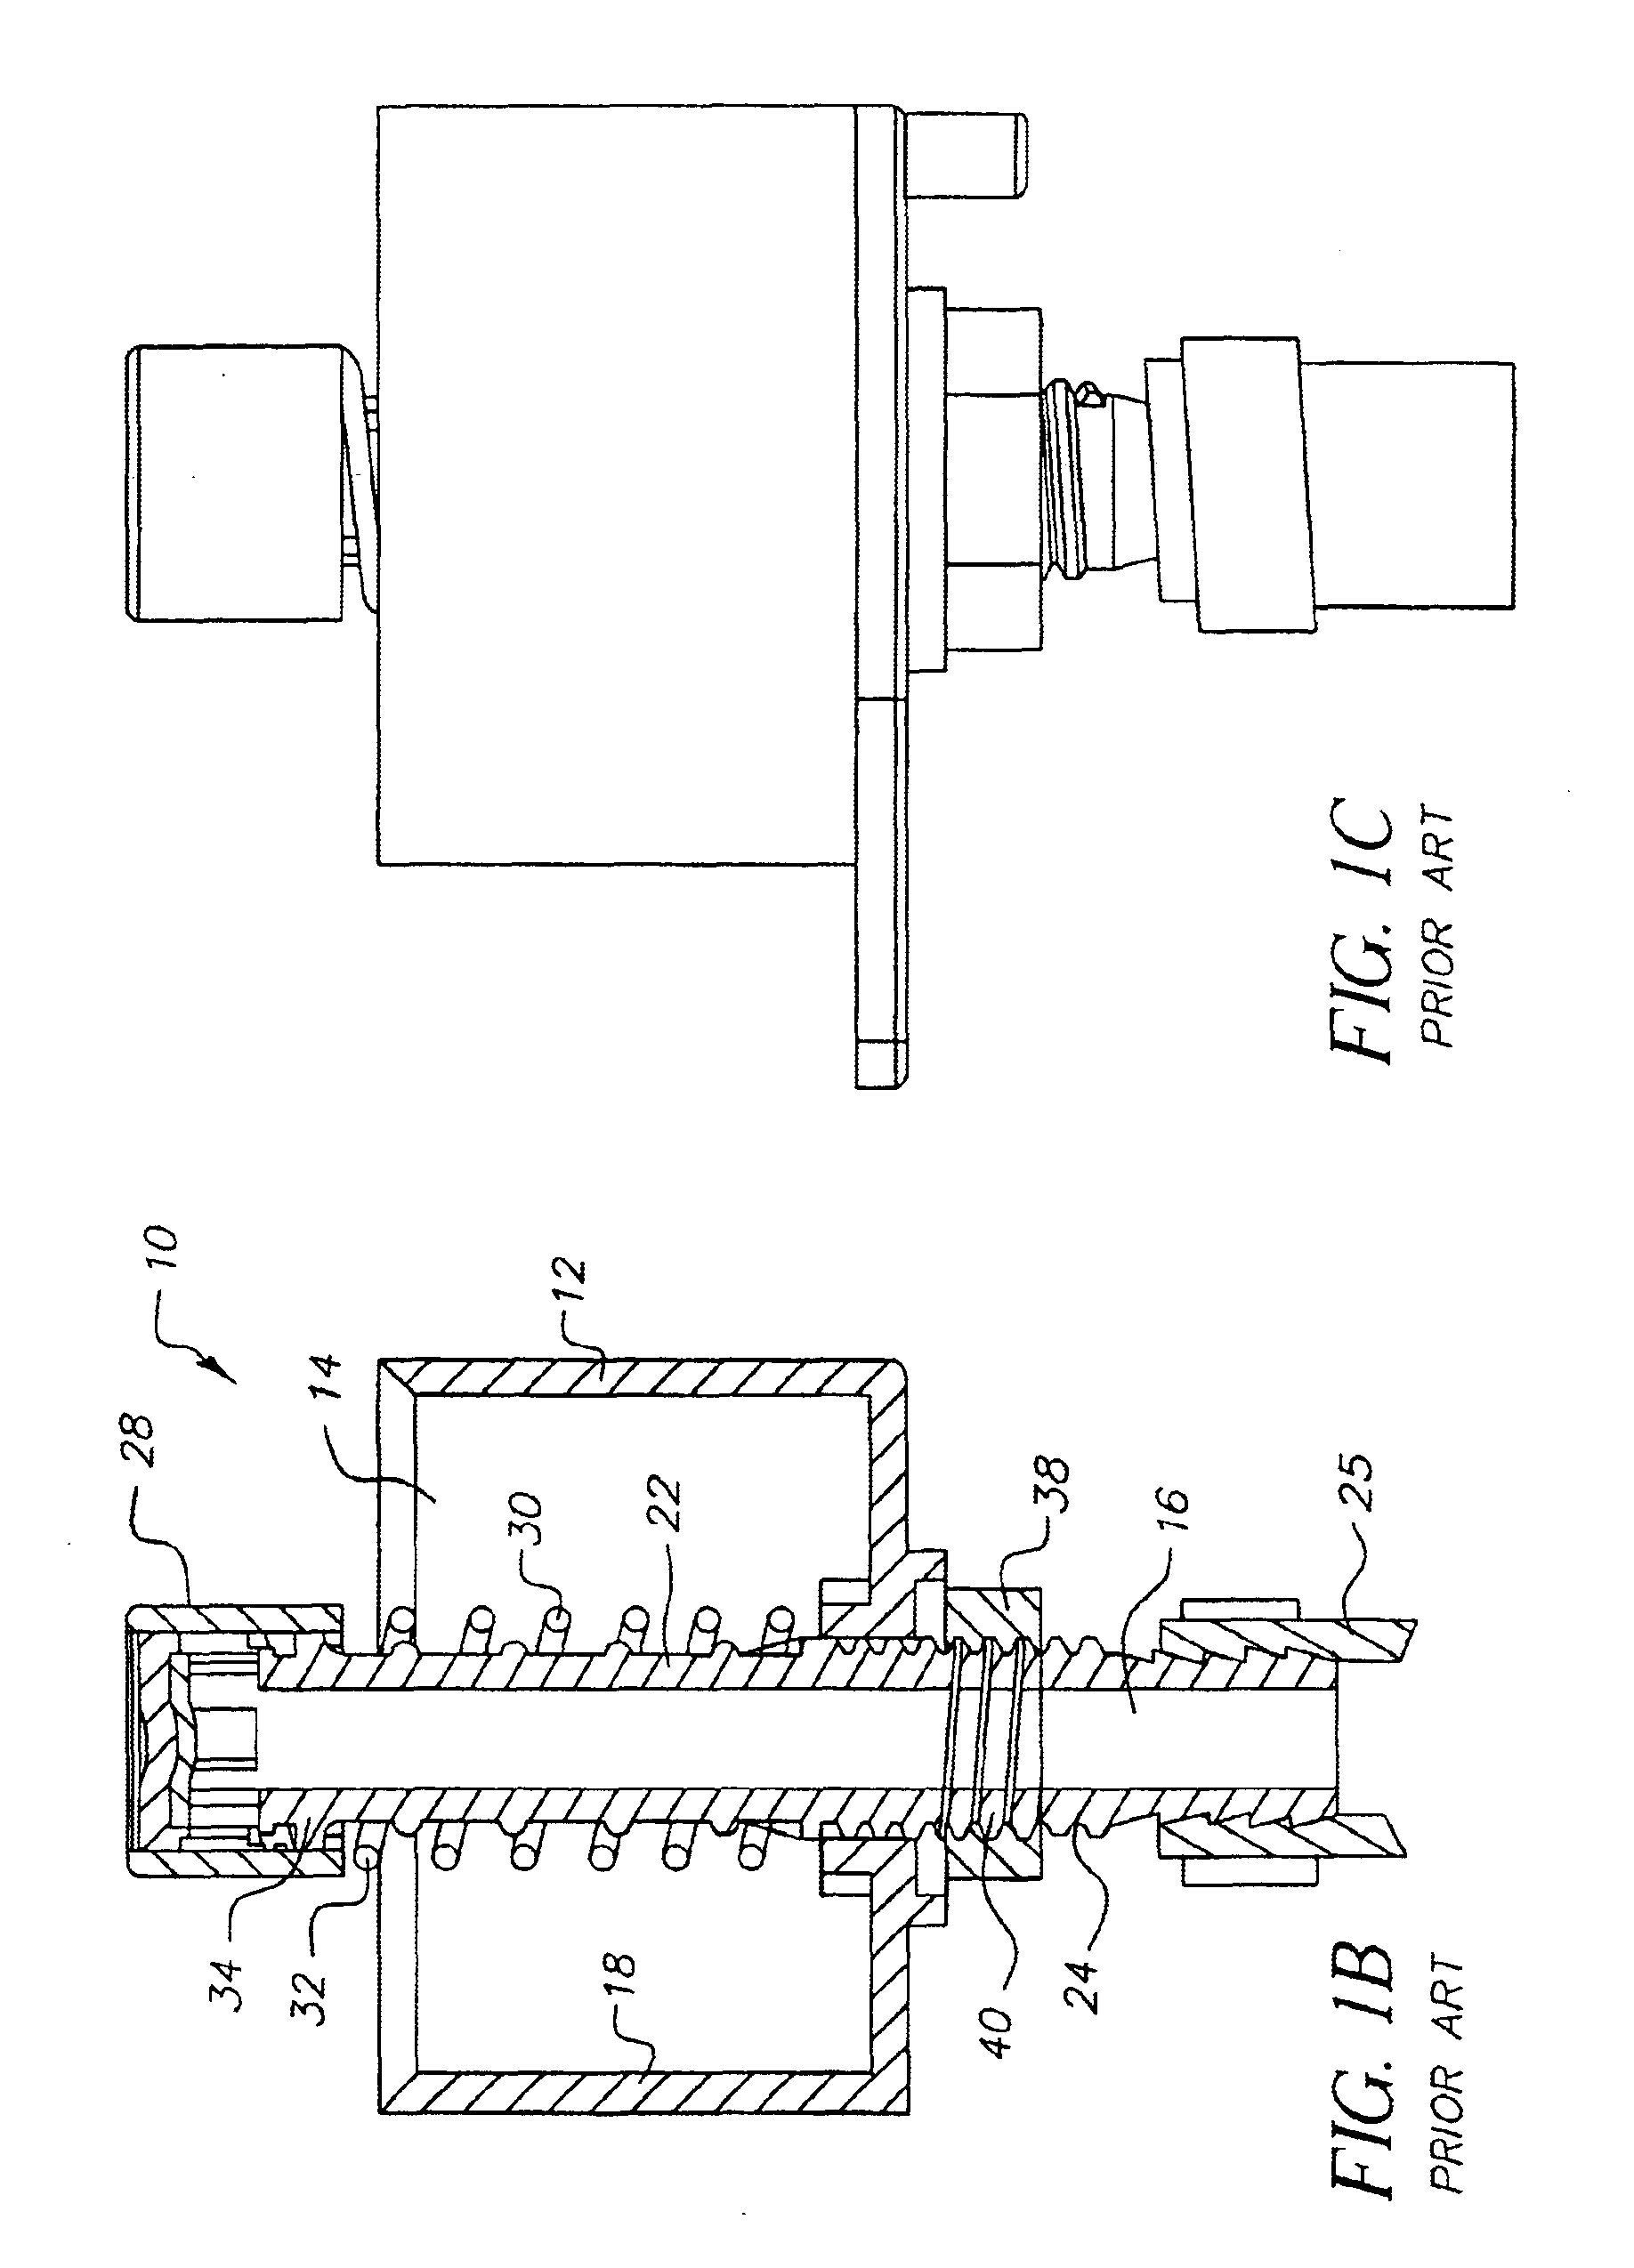 Cup and probe assembly for use in a valve system for transferring a liquid between two sources